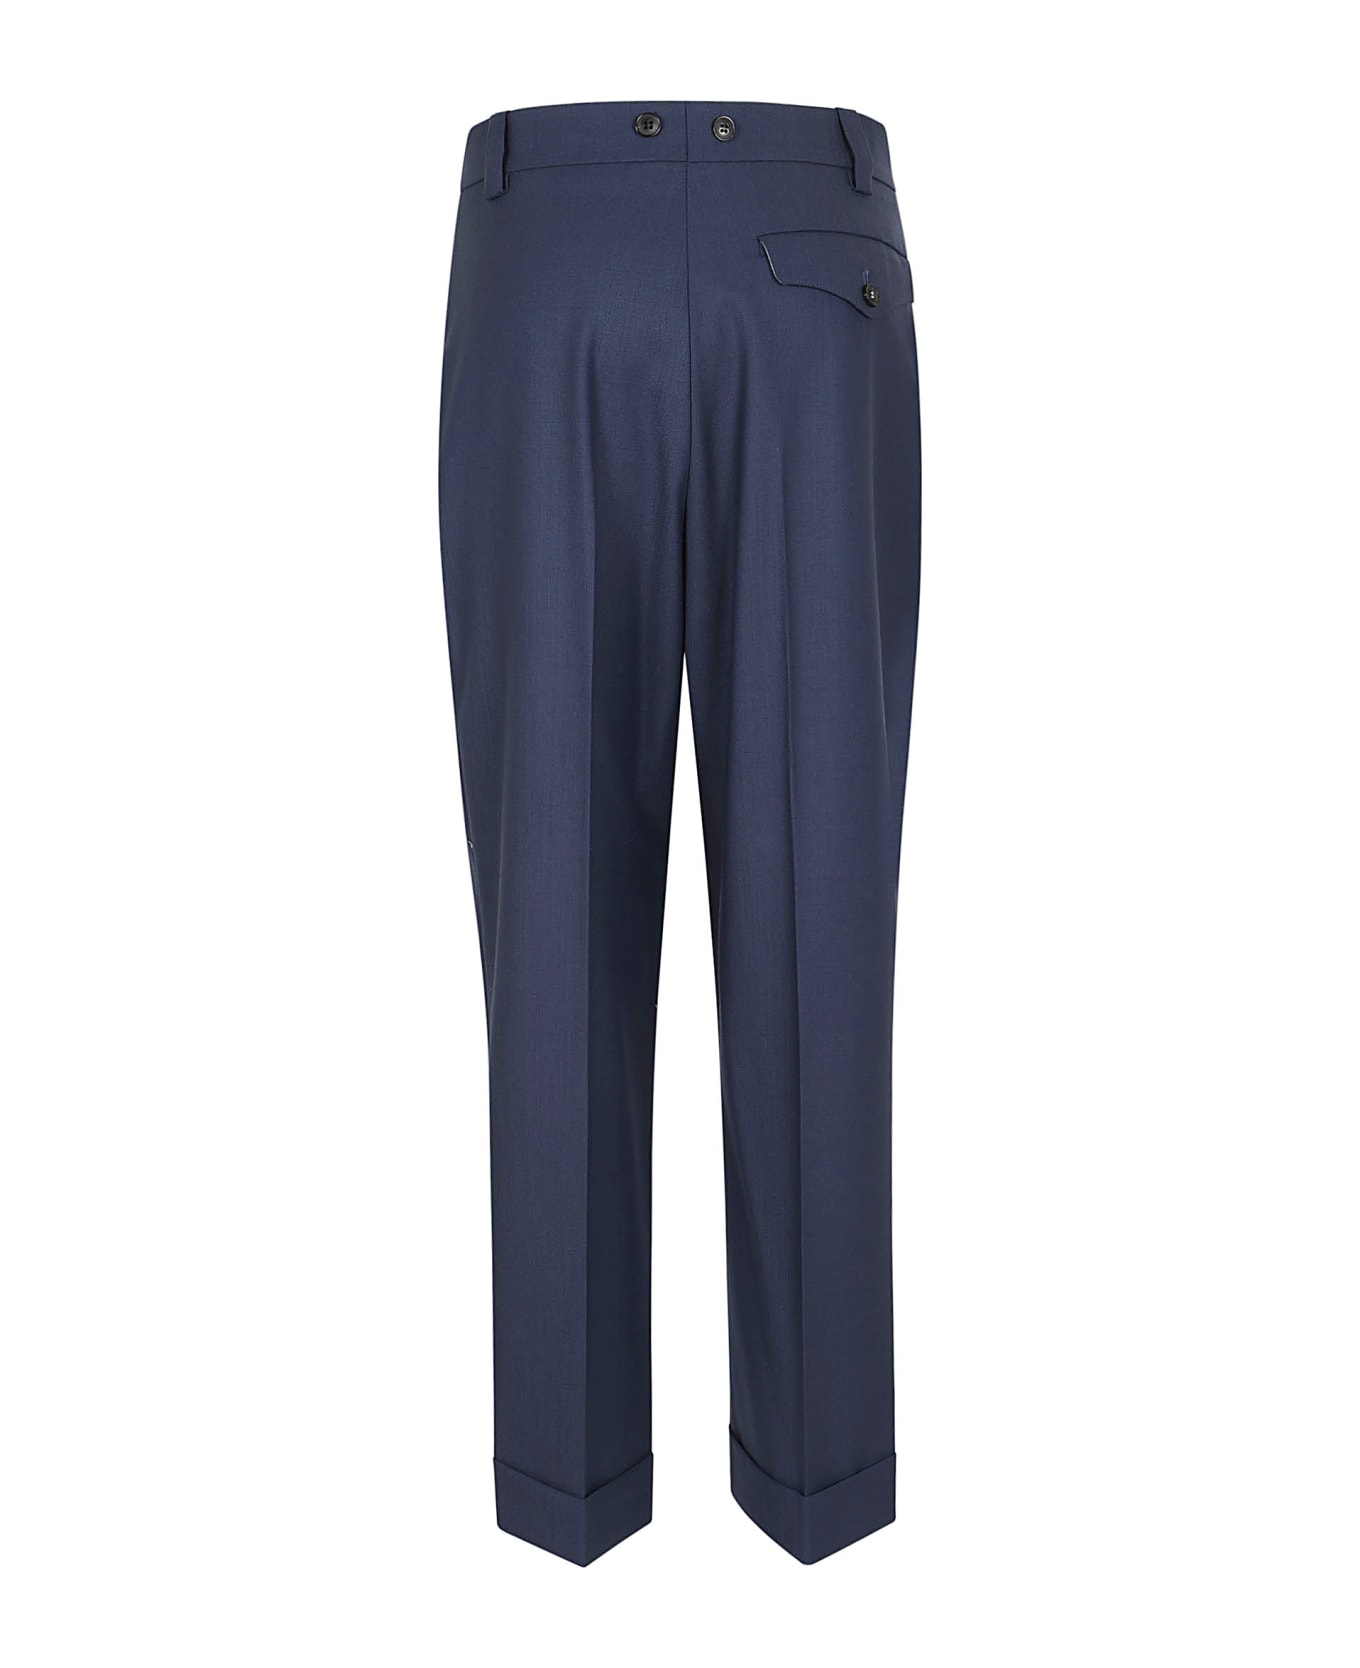 Victoria Beckham Wide Leg Cropped Trouser - Heritage Blue ボトムス